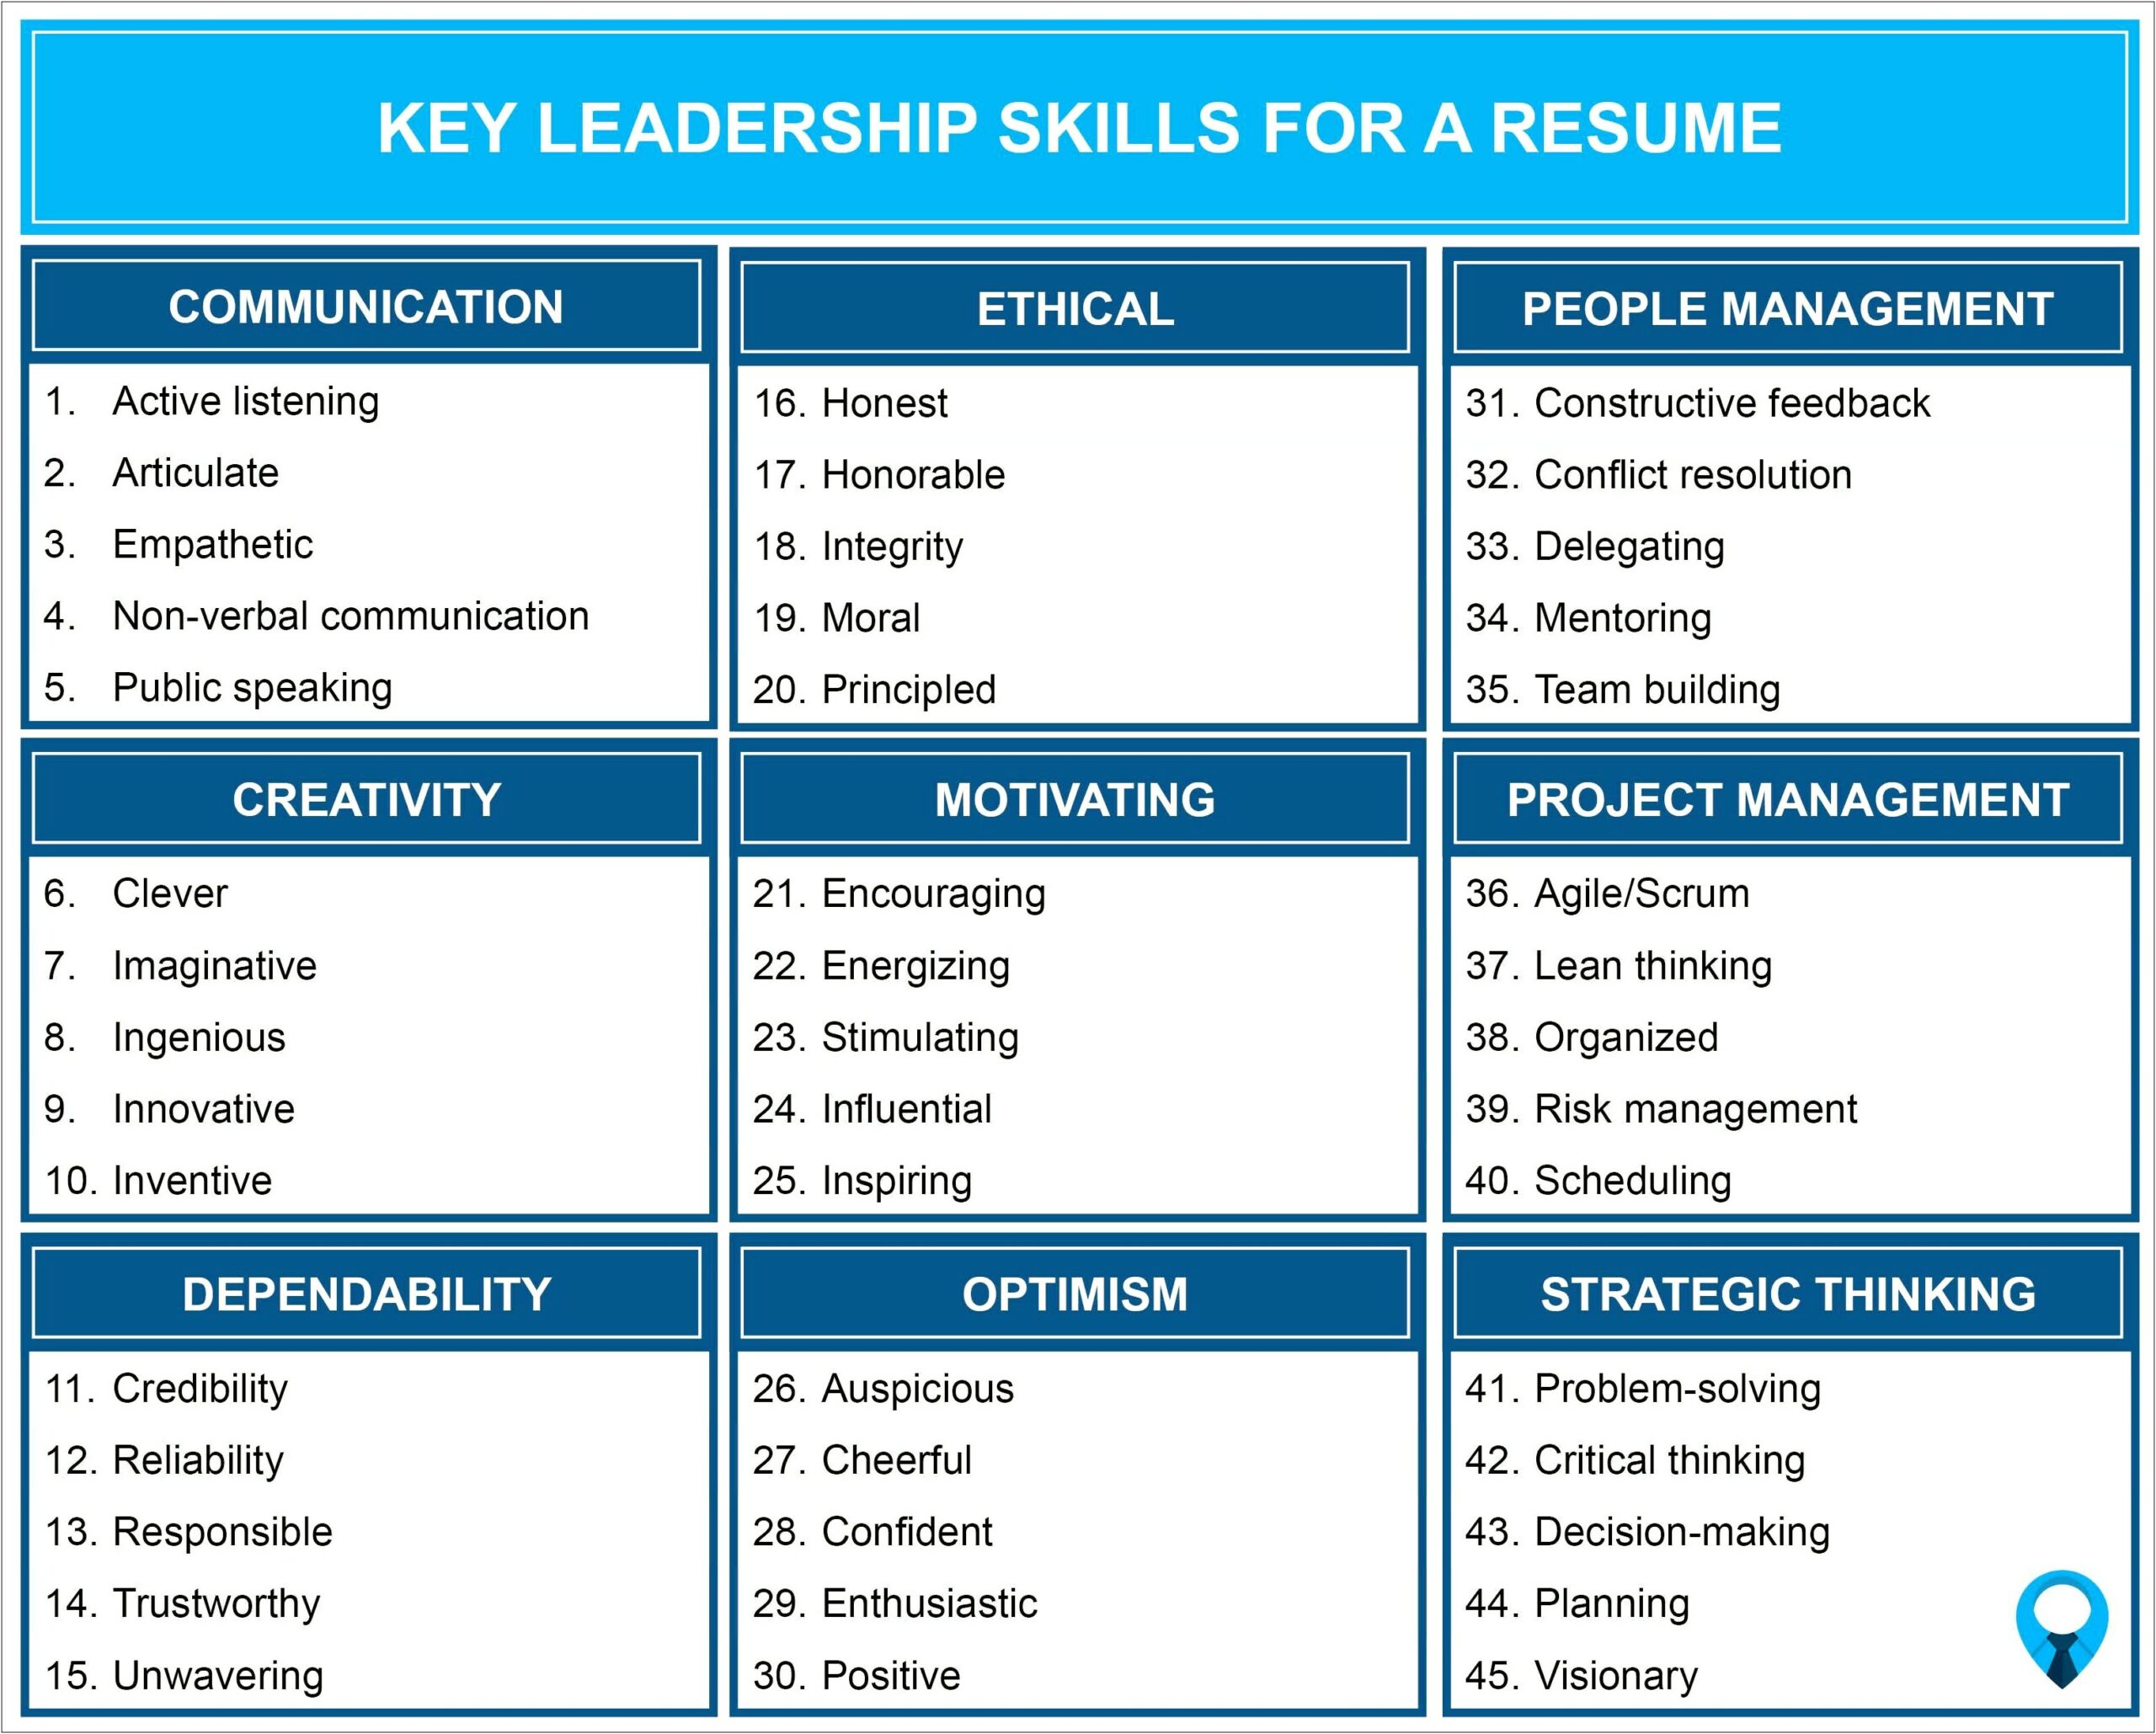 Qualities And Skills To Put On A Resume